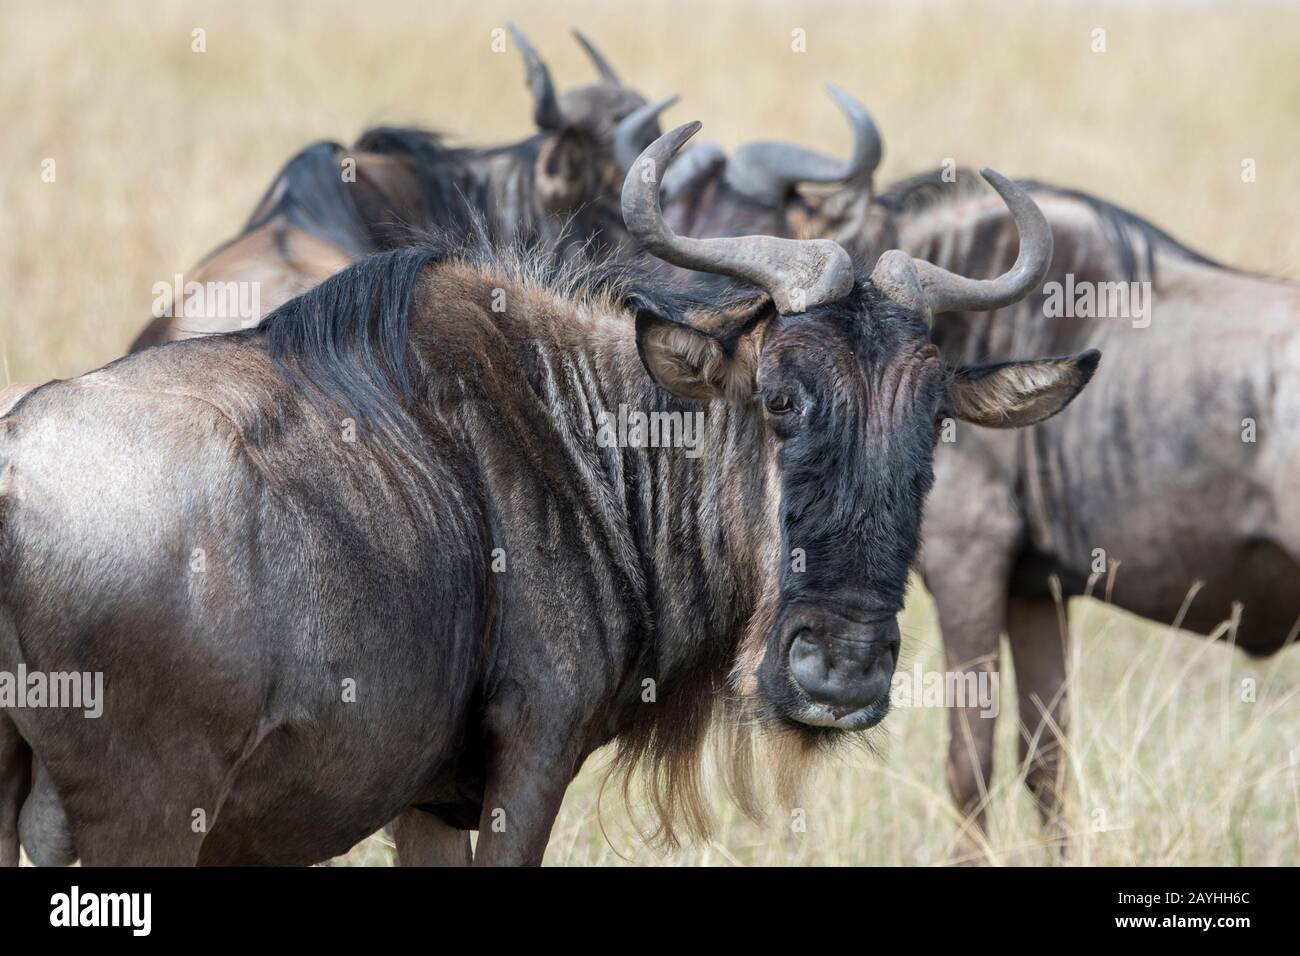 Close-up of a Wildebeest, also called gnus or wildebai, in the grasslands of the Masai Mara in Kenya. Stock Photo